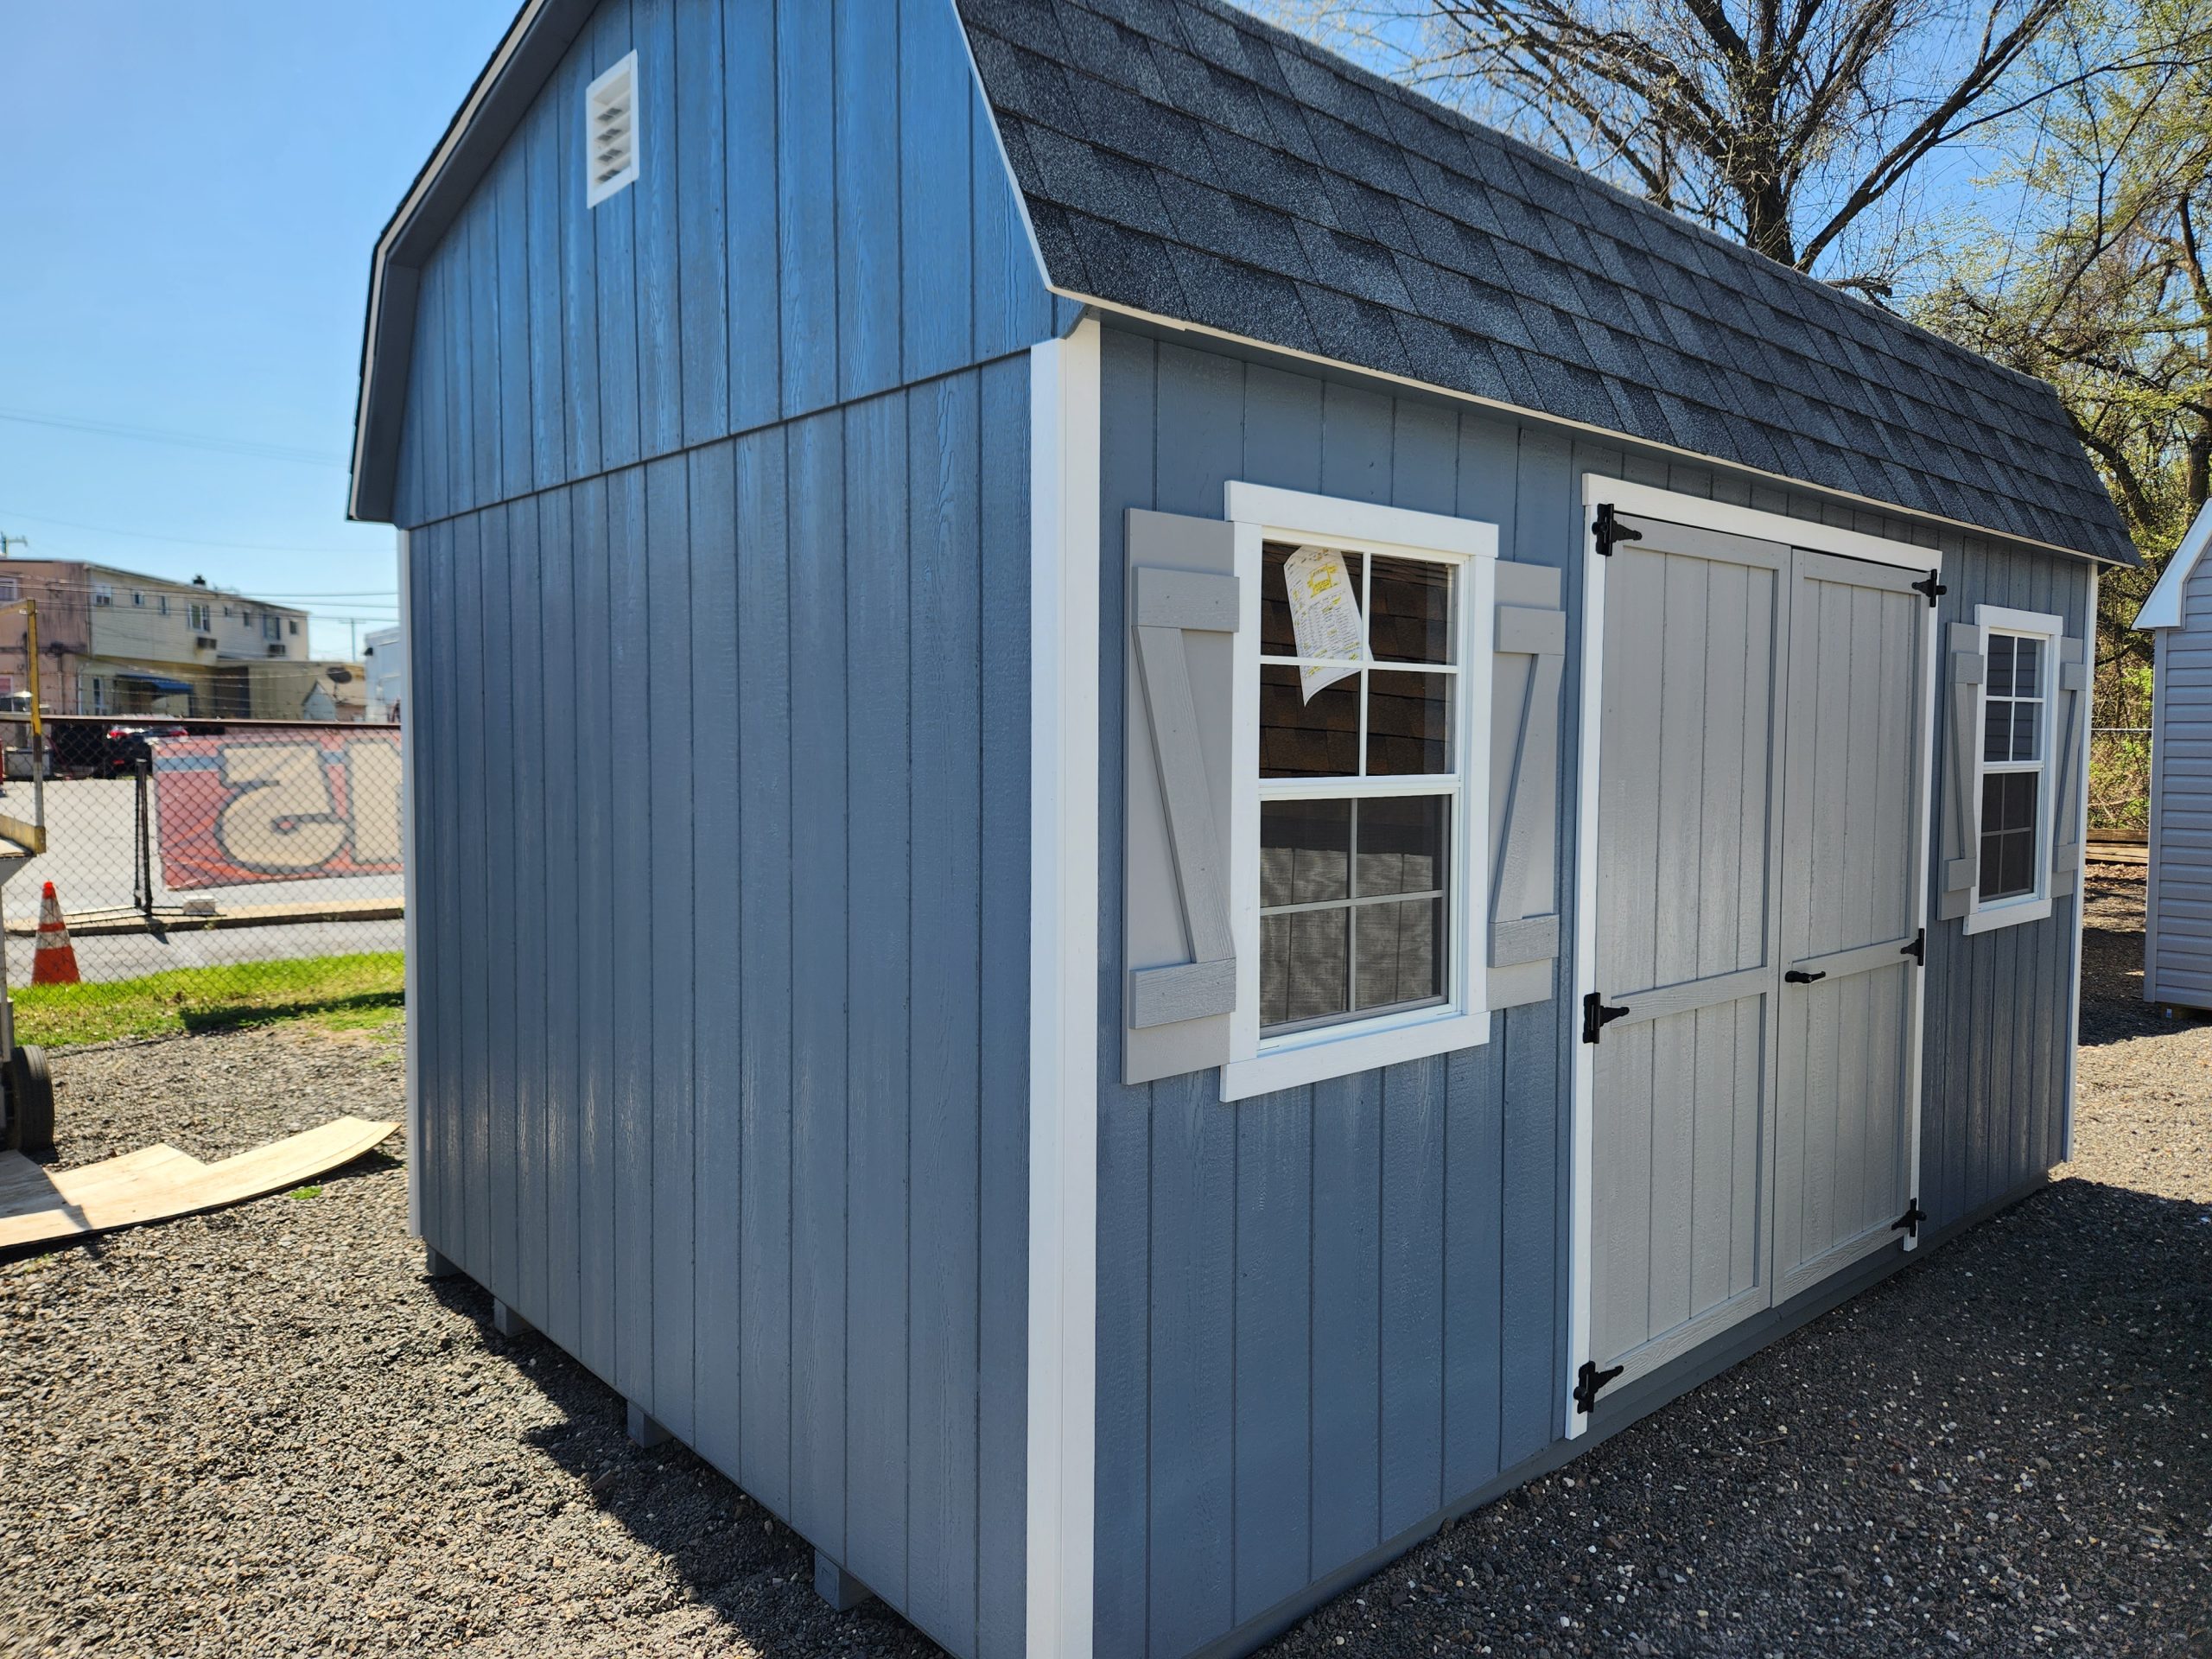 #27-23  10x16 painted wood DB W7' walls, Zshutters and lofts , $6483, New sale price $6158.00